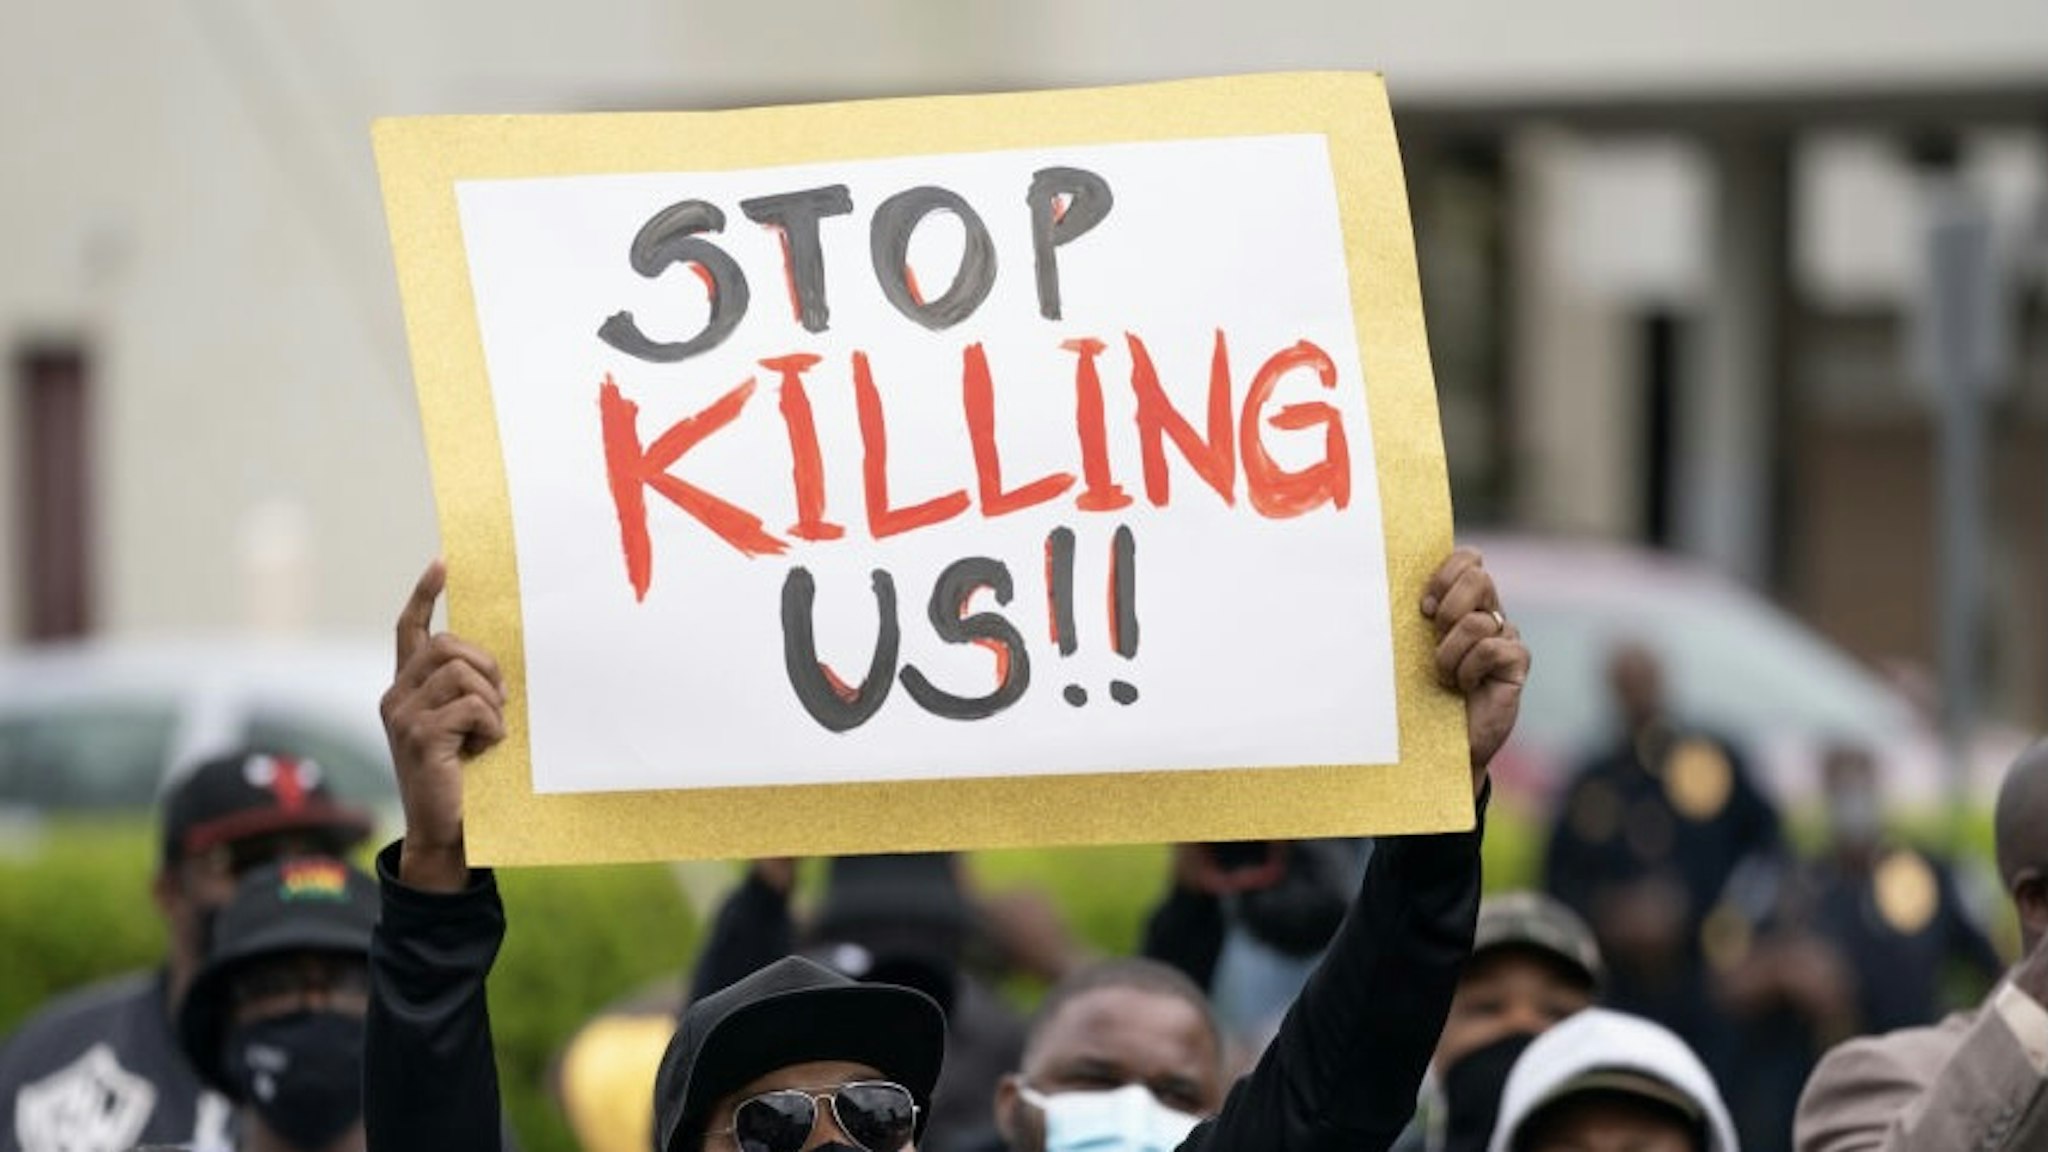 ELIZABETH CITY, NC - APRIL 23: Demonstrators gather outside a government building during an emergency city council meeting April 23, 2021 in Elizabeth City, North Carolina. Protestors gathered as elected officials discussed the possible release of police body camera footage from the shooting death of Andrew Brown Jr. on April 21. (Photo by Sean Rayford/Getty Images)